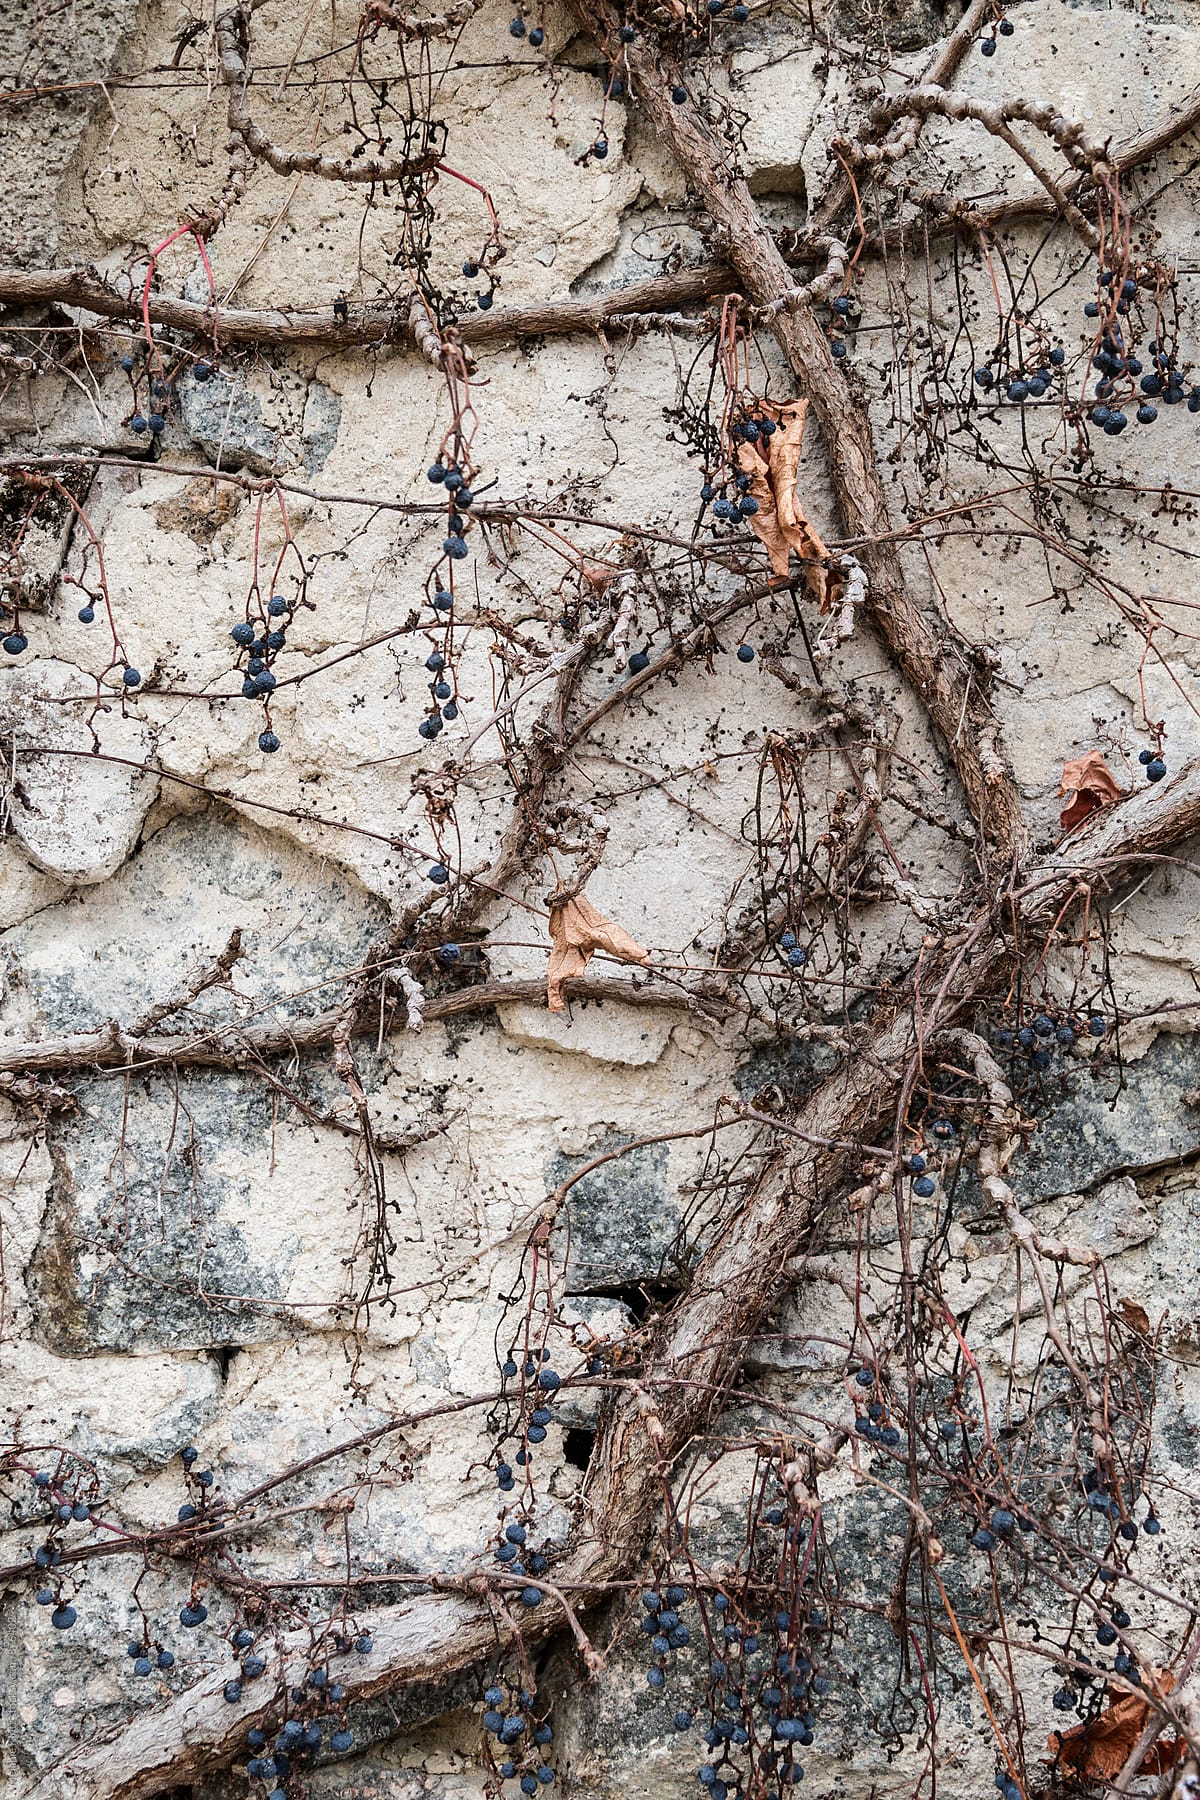 Vines with frozen vine berries on decaying backgrounds